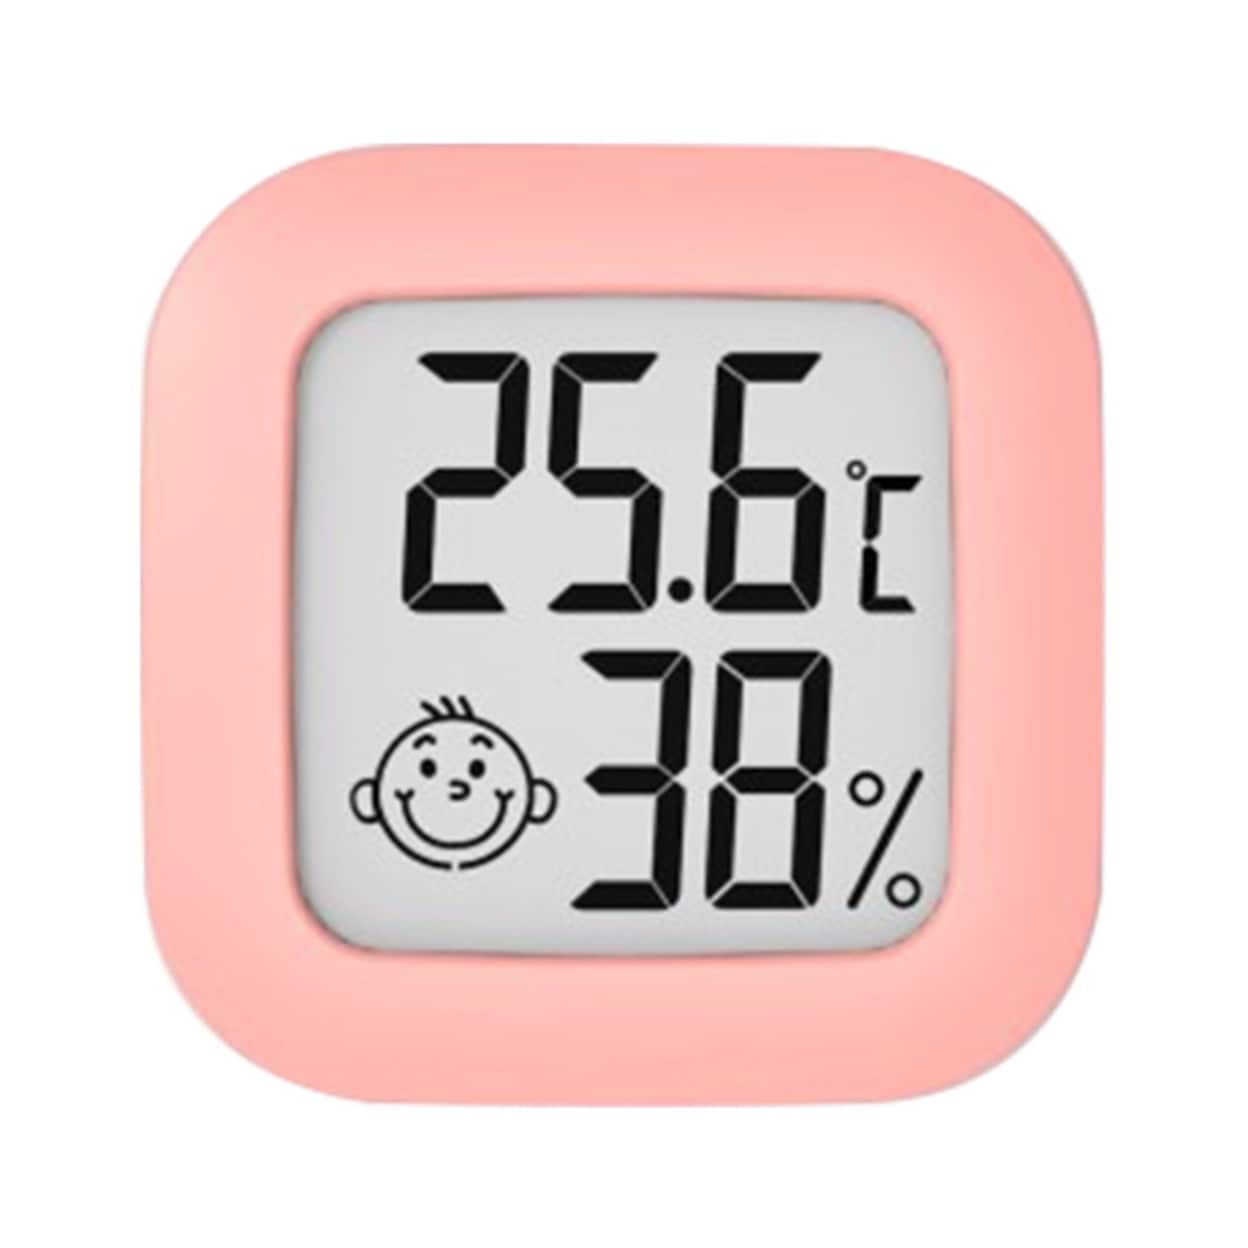 https://ak1.ostkcdn.com/images/products/is/images/direct/154b0410127a8023105113ee32412c19f8fb2391/Professional-Temperature-Humidity-Meter-Real-Time-Monitoring-Accurate-Measurement-Test-Tools-Hygrometer-Thermometer-For.jpg